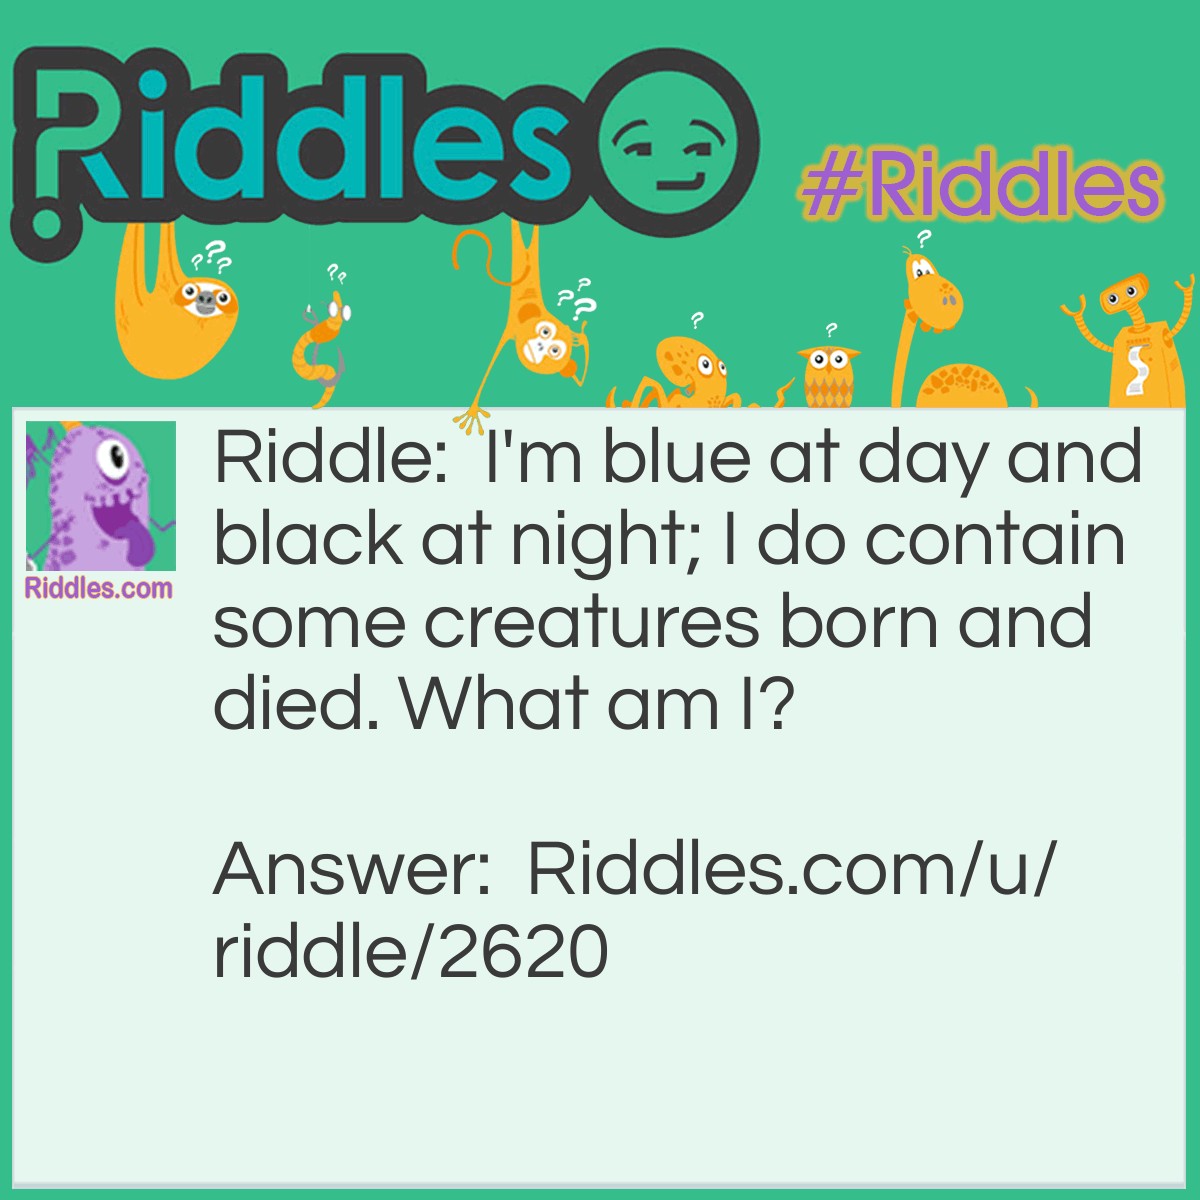 Riddle: I'm blue at day and black at night; I do contain some creatures born and died. What am I? Answer: Sea water.